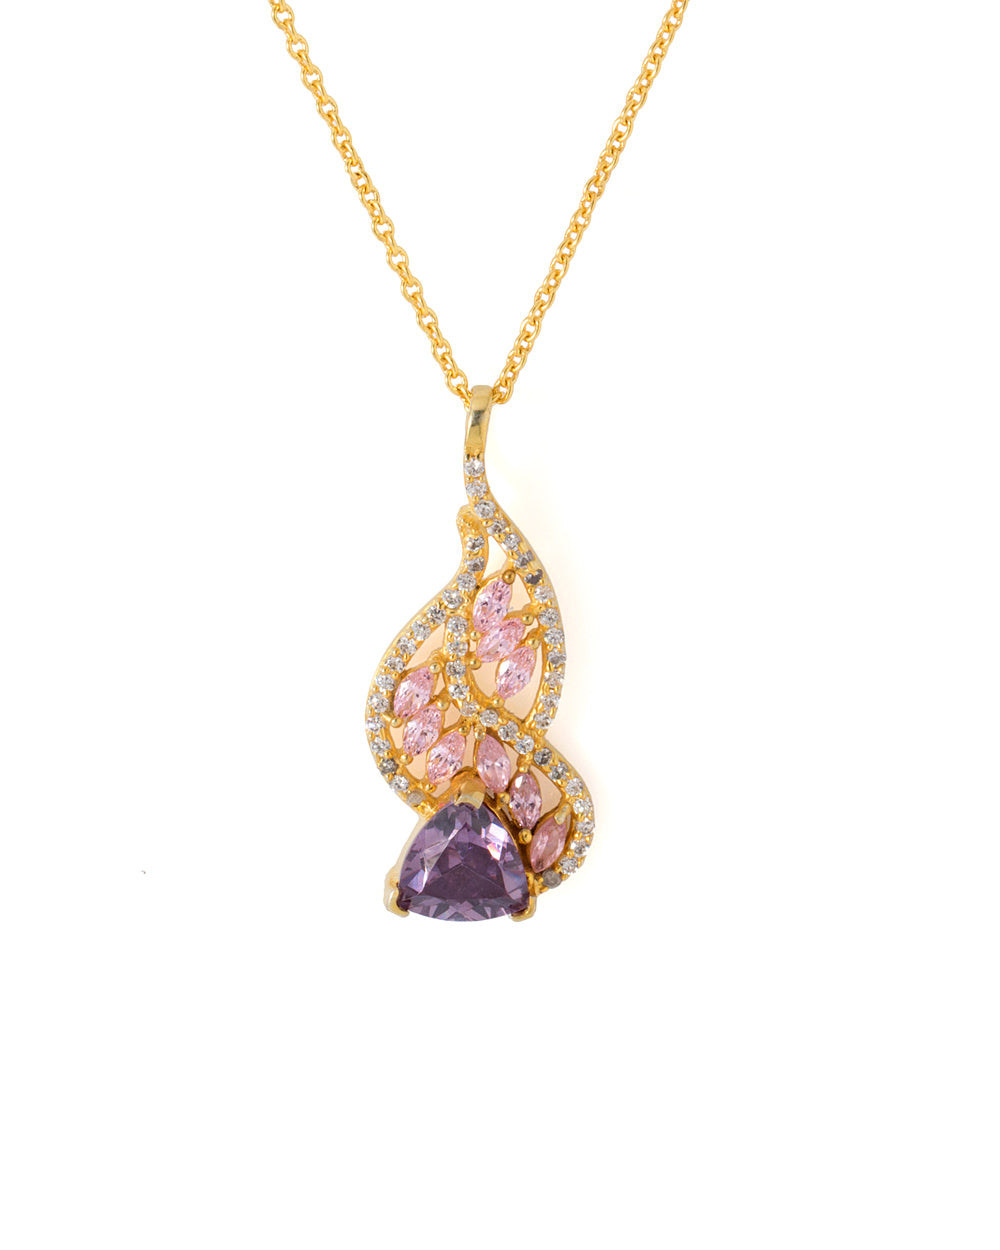 Glittering Pendant With Chain Adorned With Colorful CZ